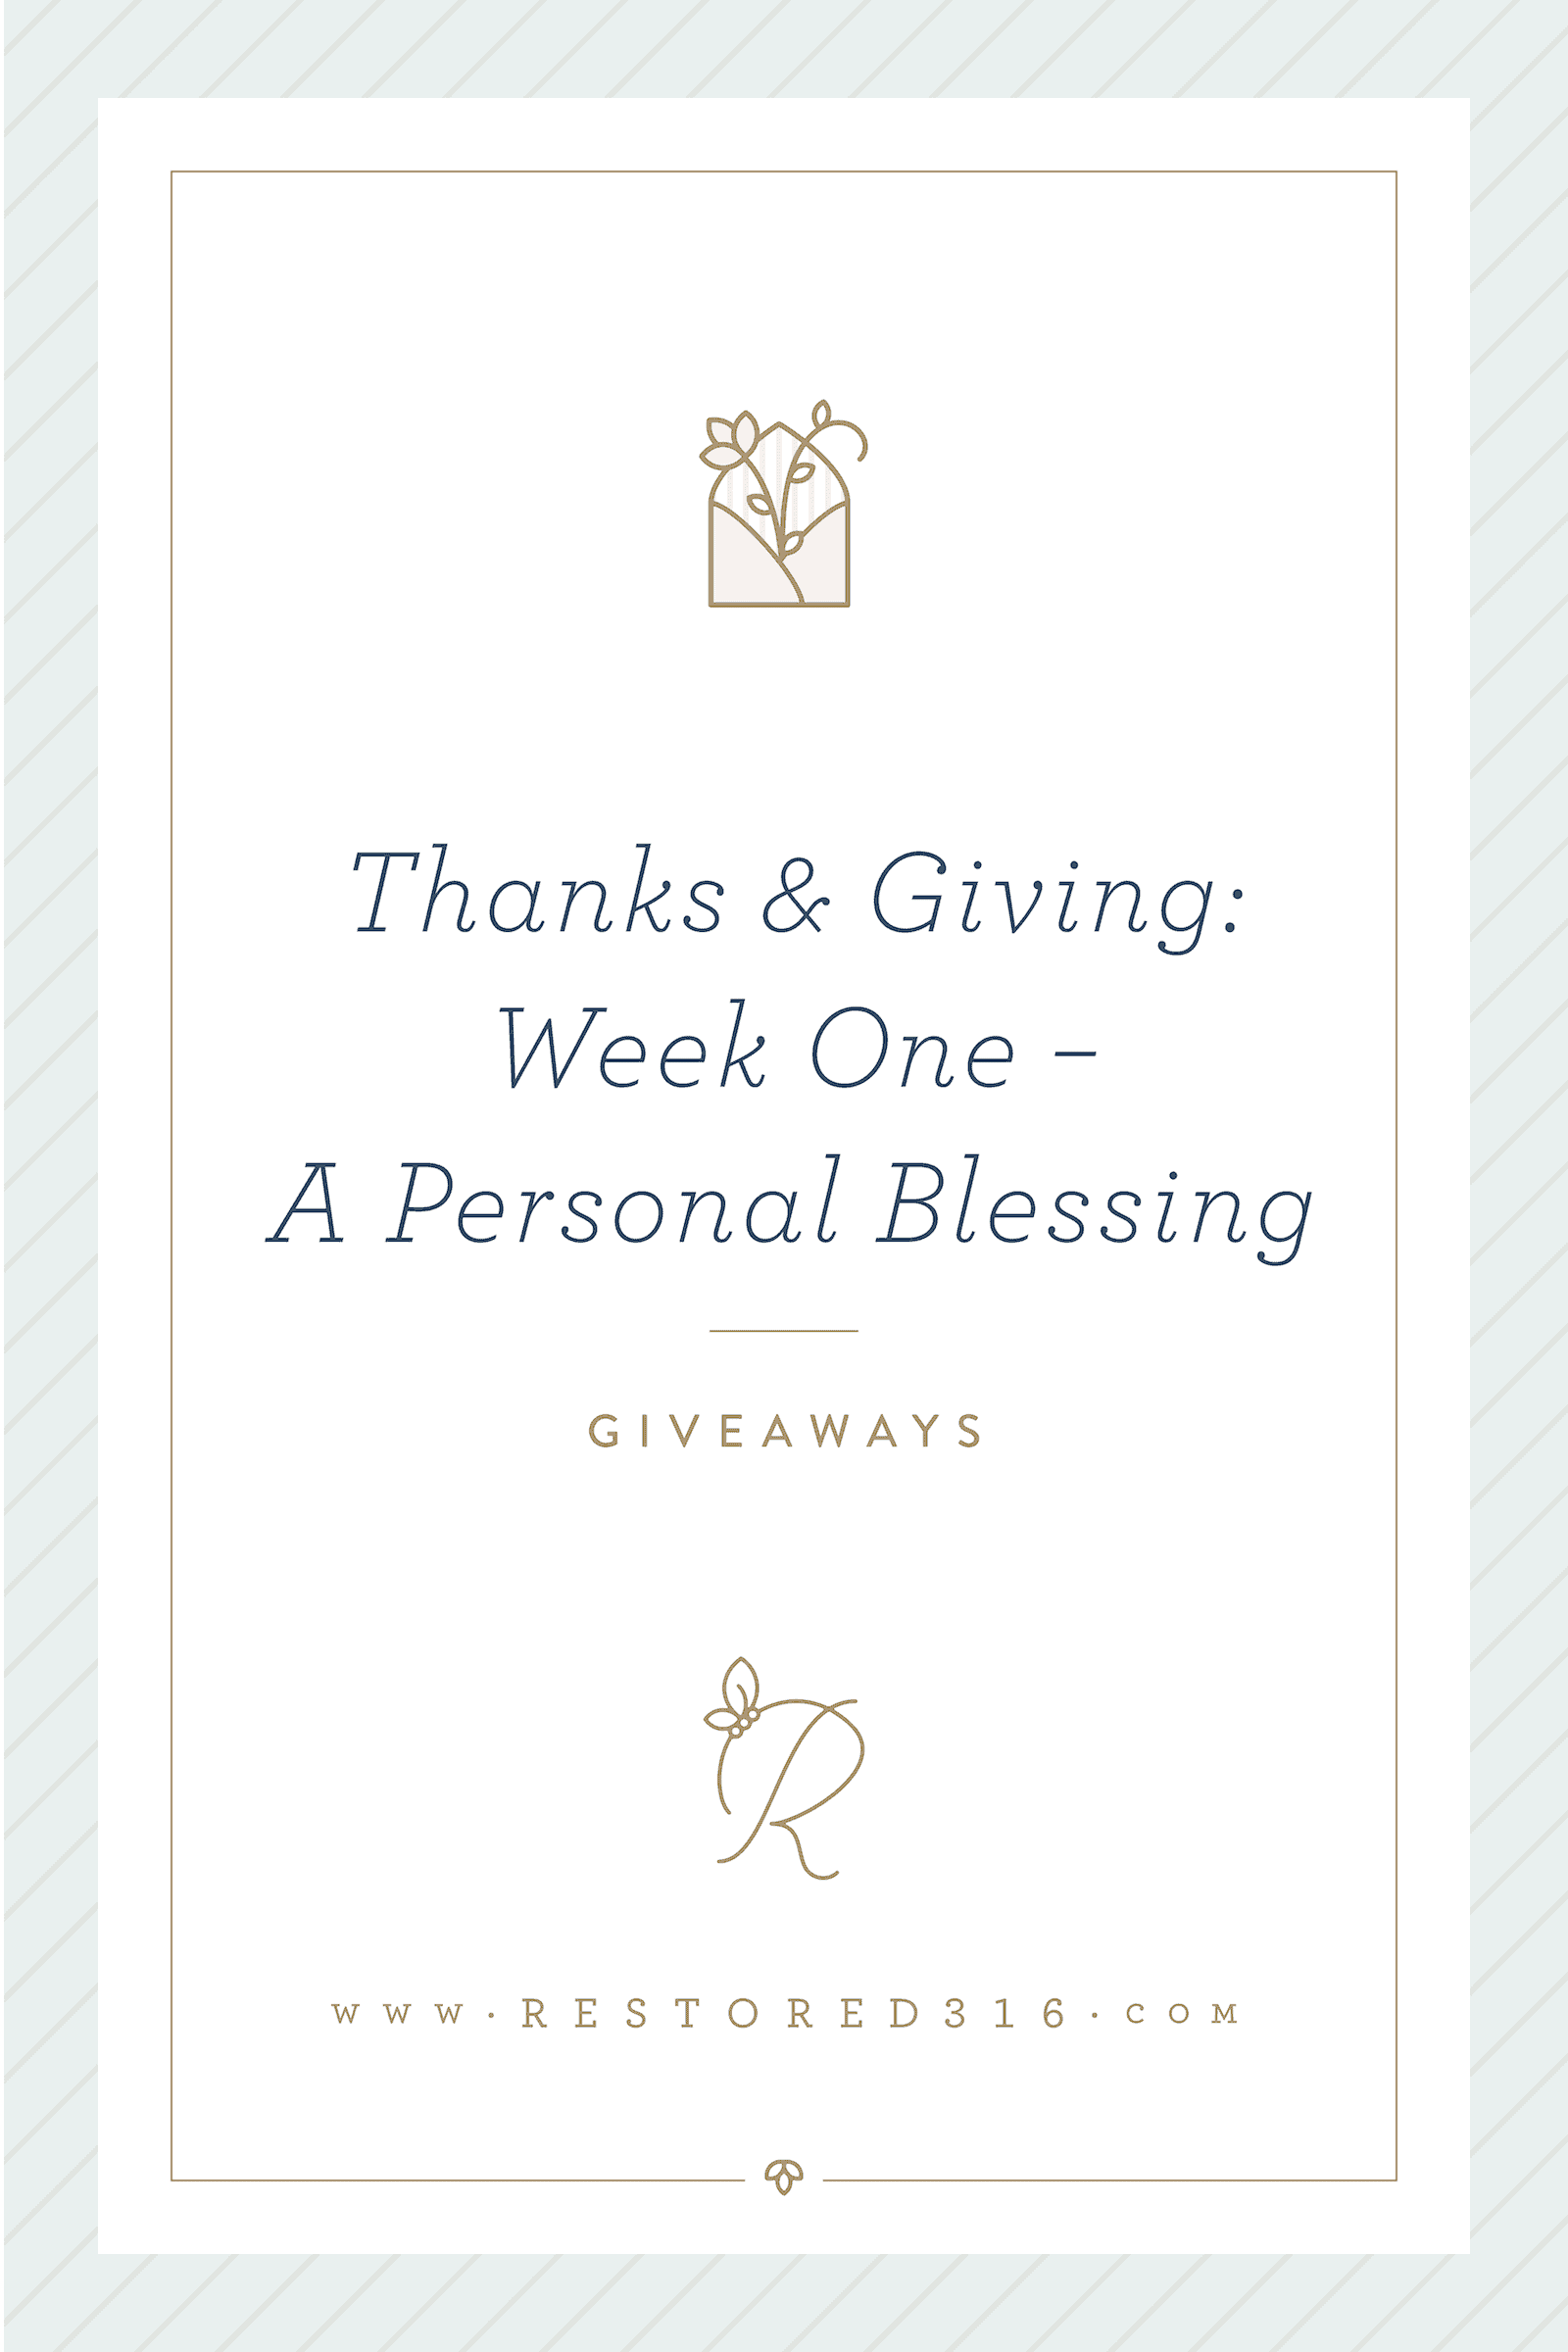 Thanks & Giving: Week One – A Personal Blessing